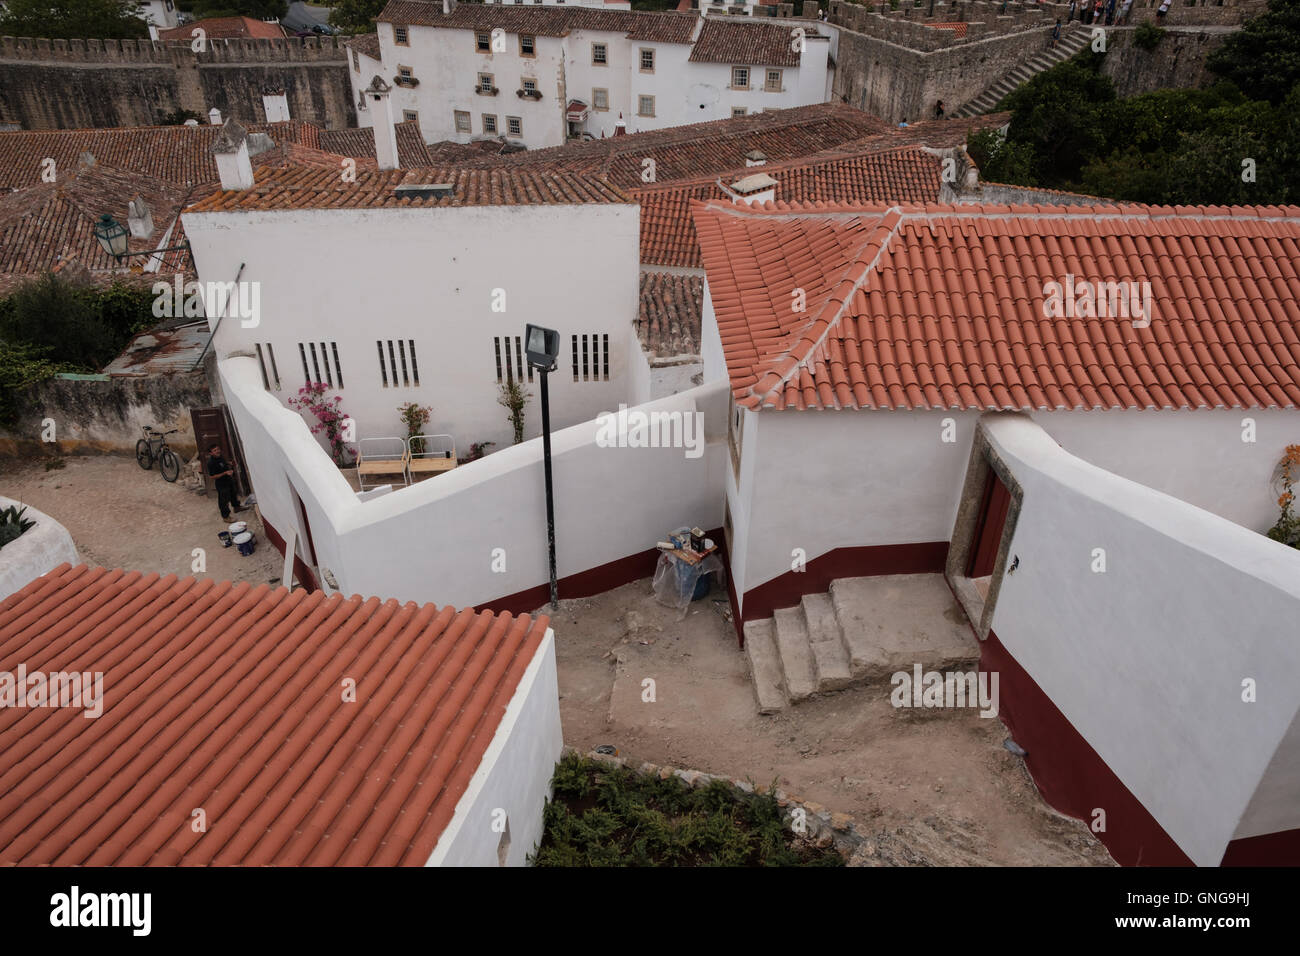 Traditional tiled rooves of the medieval walled town of Obidos, Portugal. Stock Photo